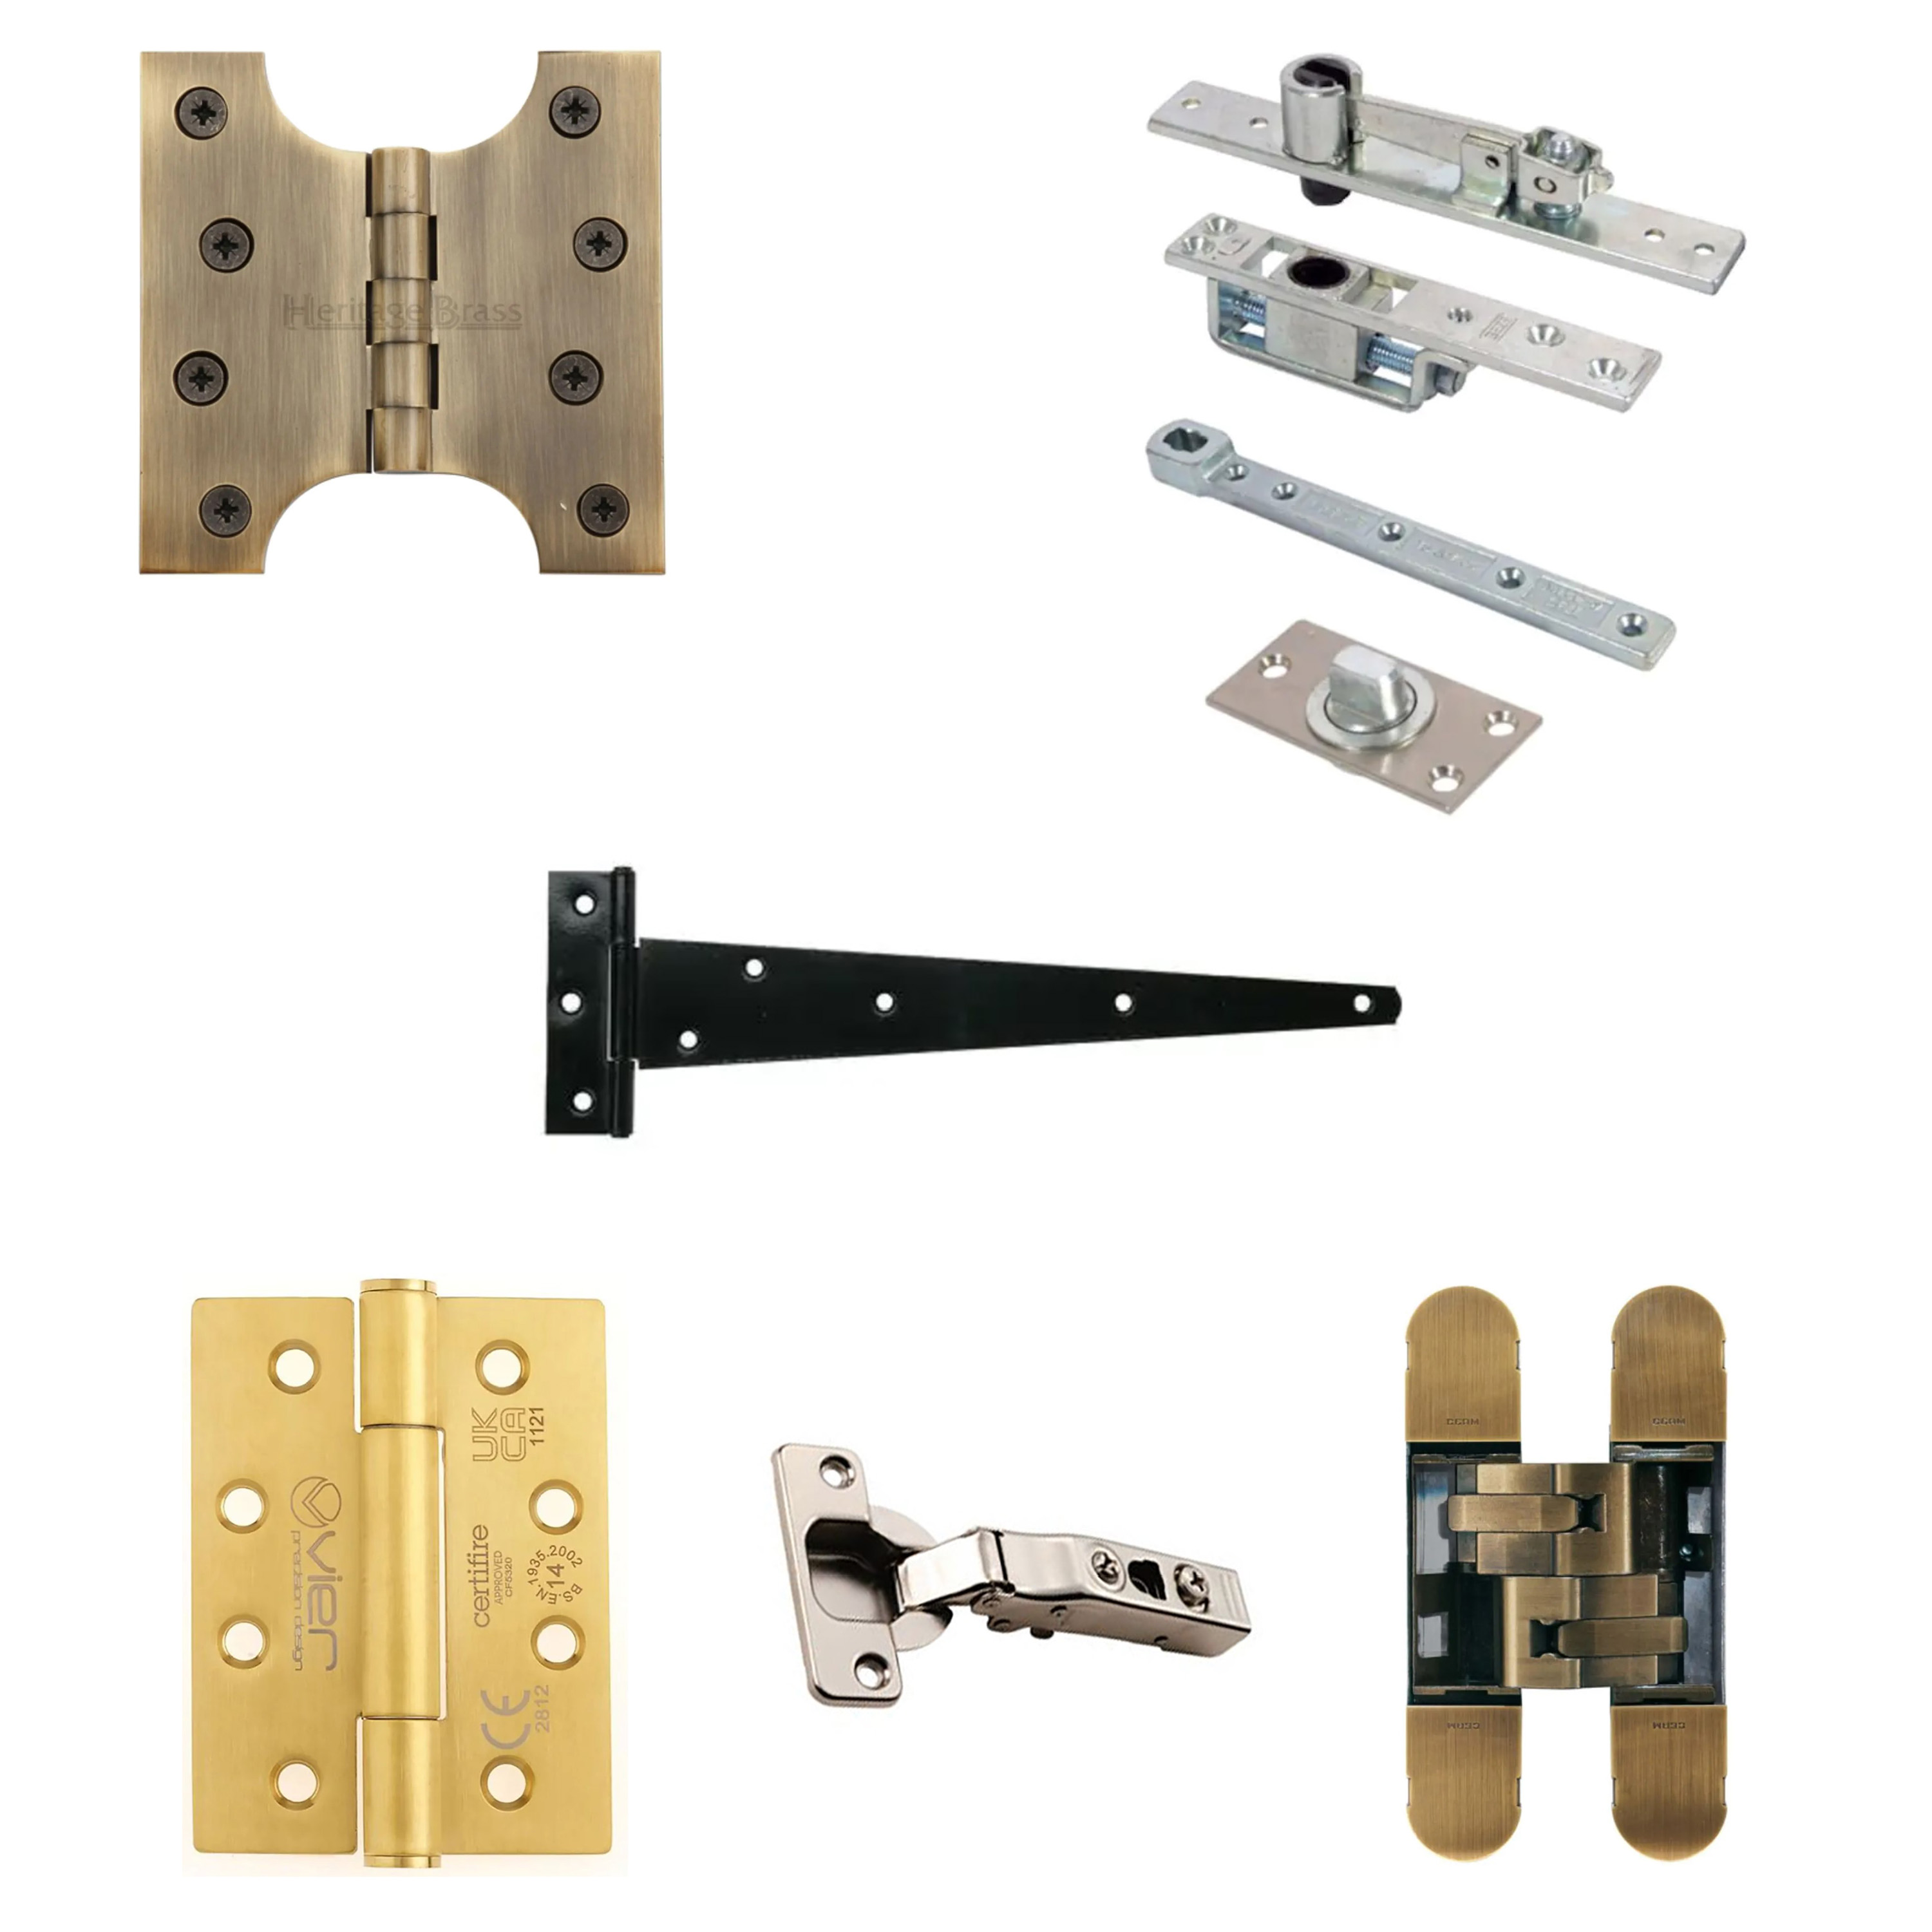 Glimpse through the Various Types of Hinges for Cabinets